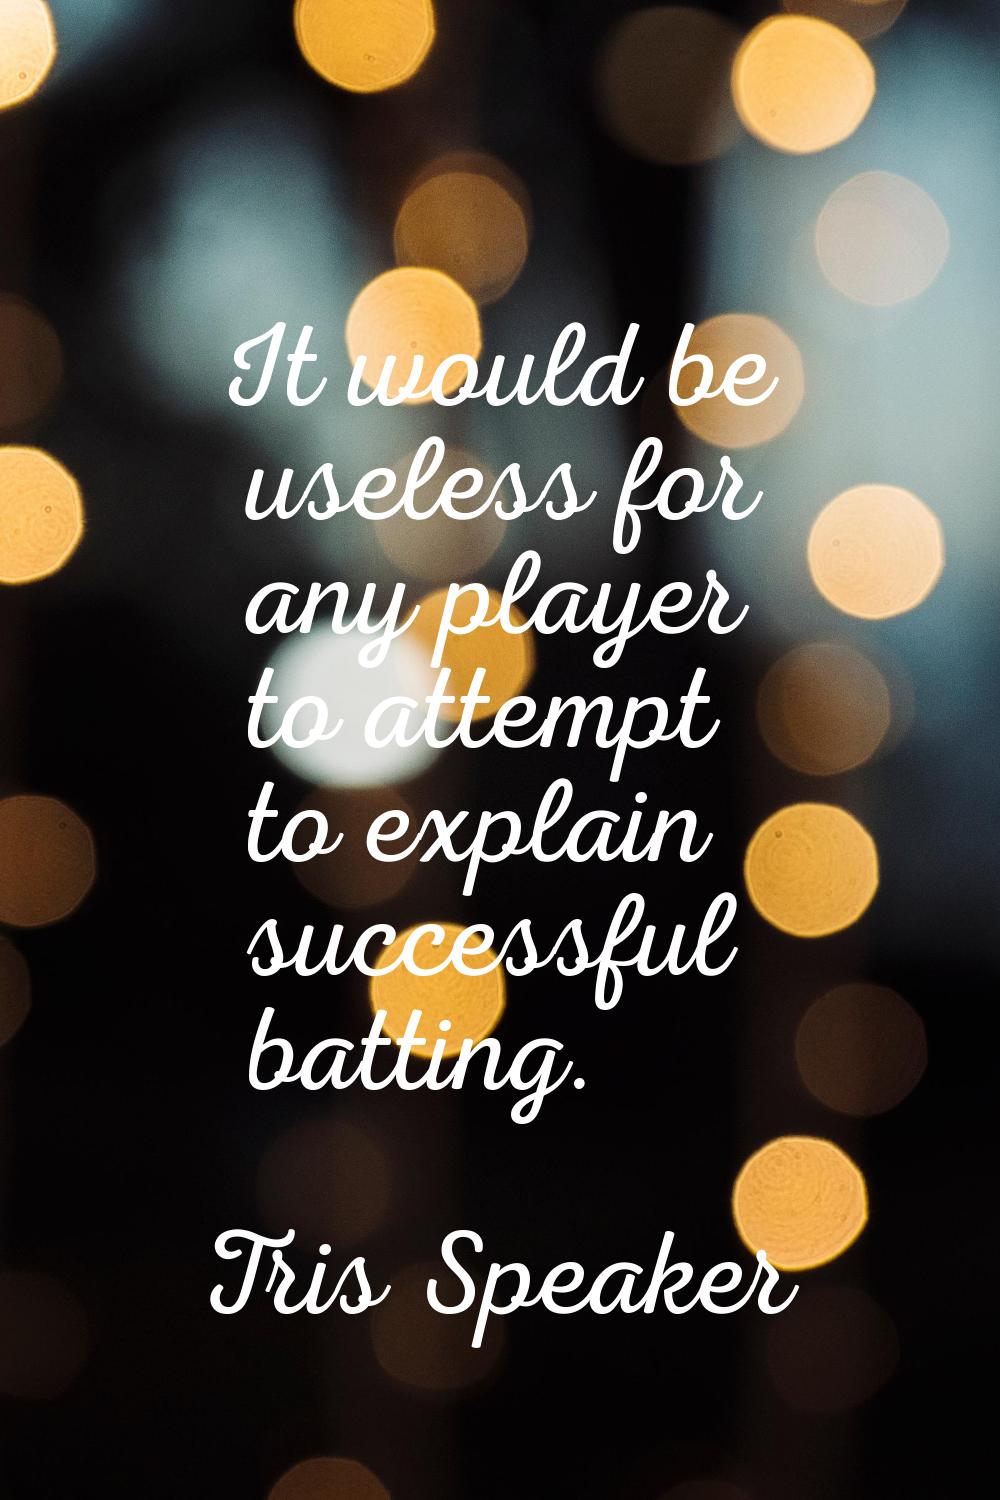 It would be useless for any player to attempt to explain successful batting.